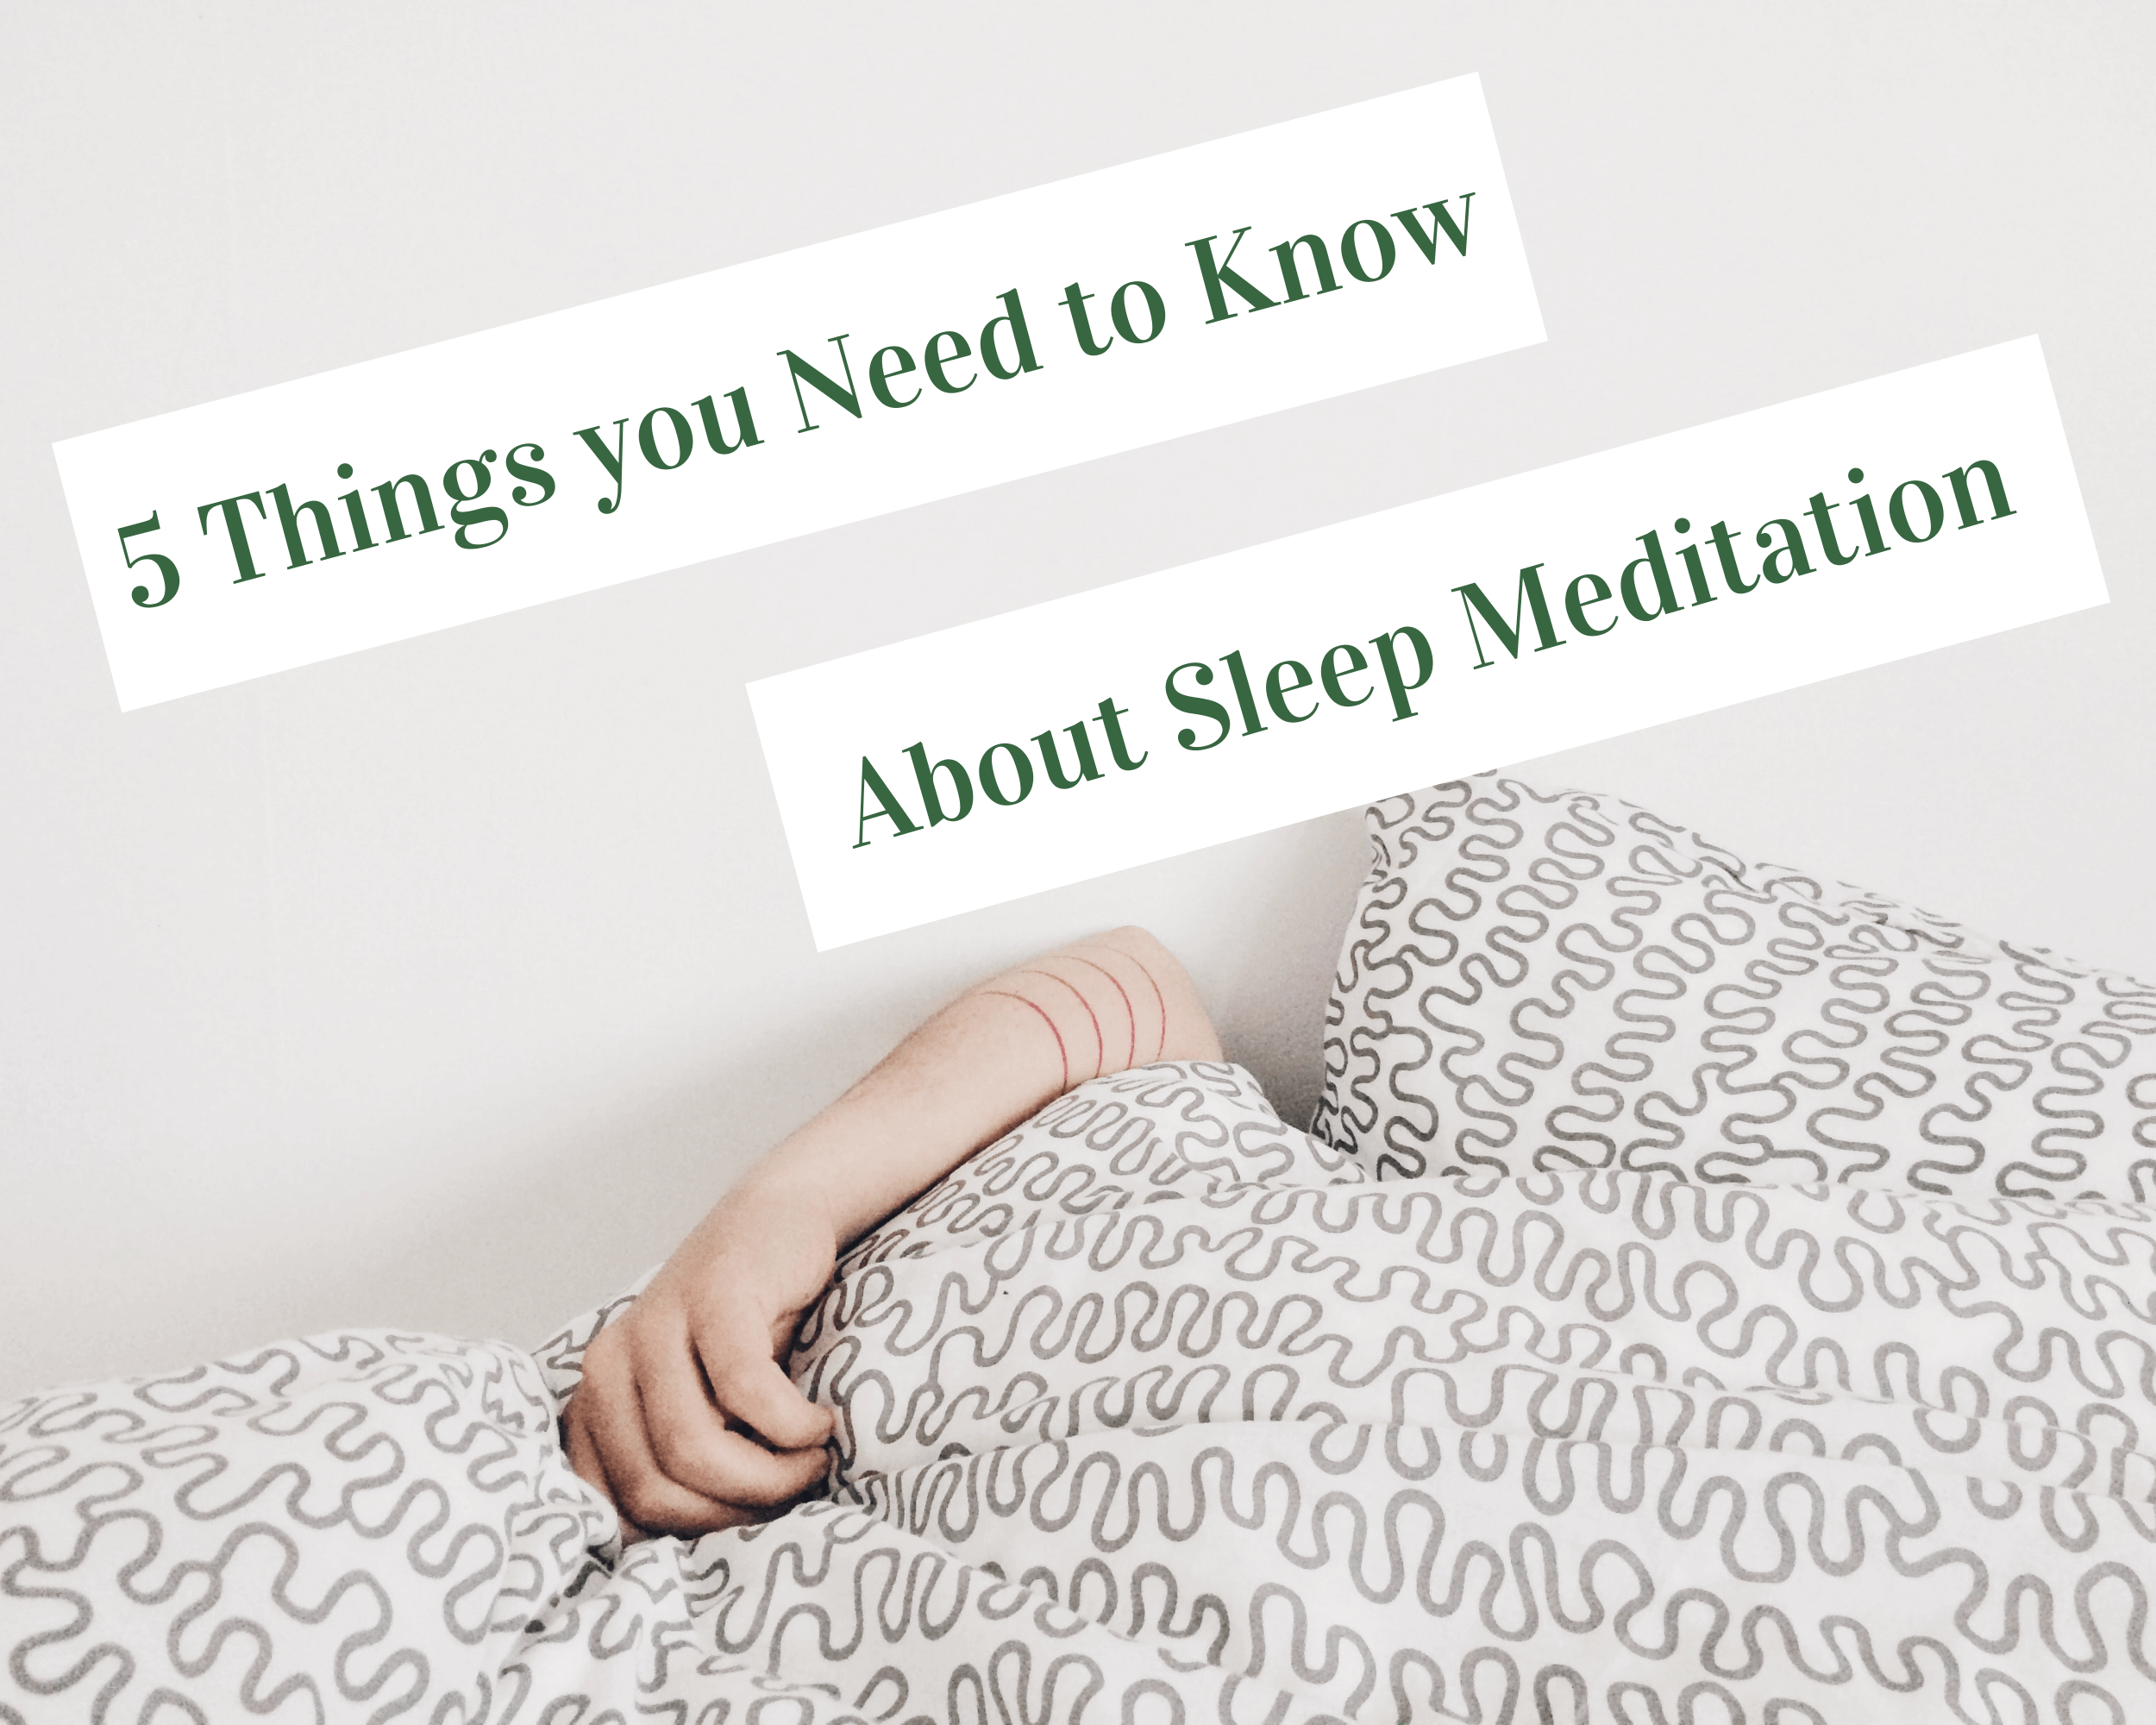 5 things you need to know about sleep meditation